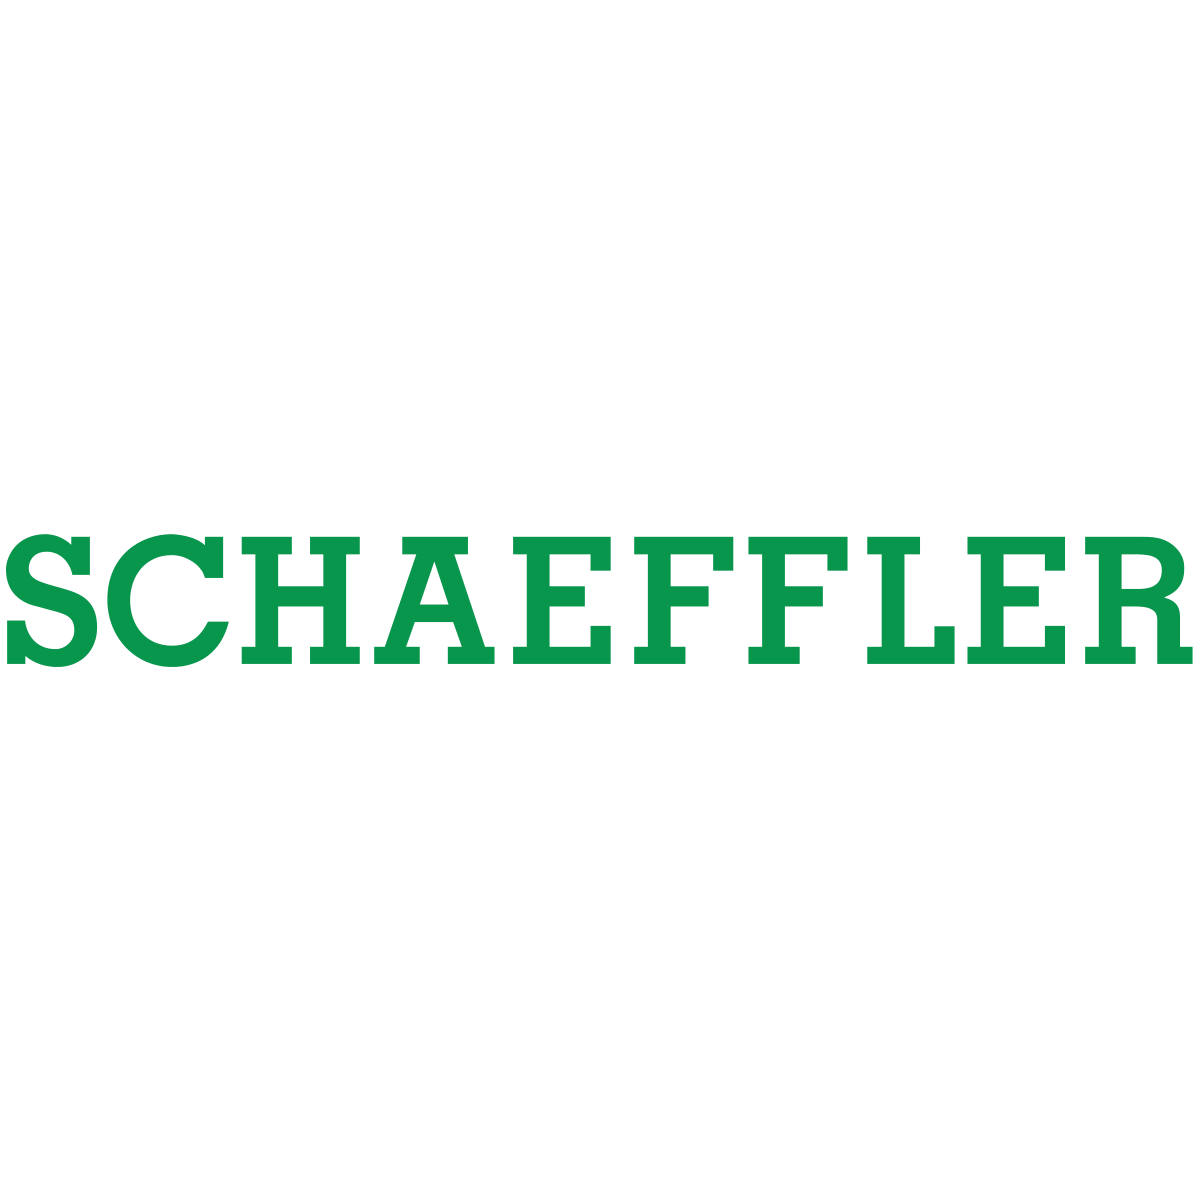 Introducing the Schaeffler Group to Chain & Drives